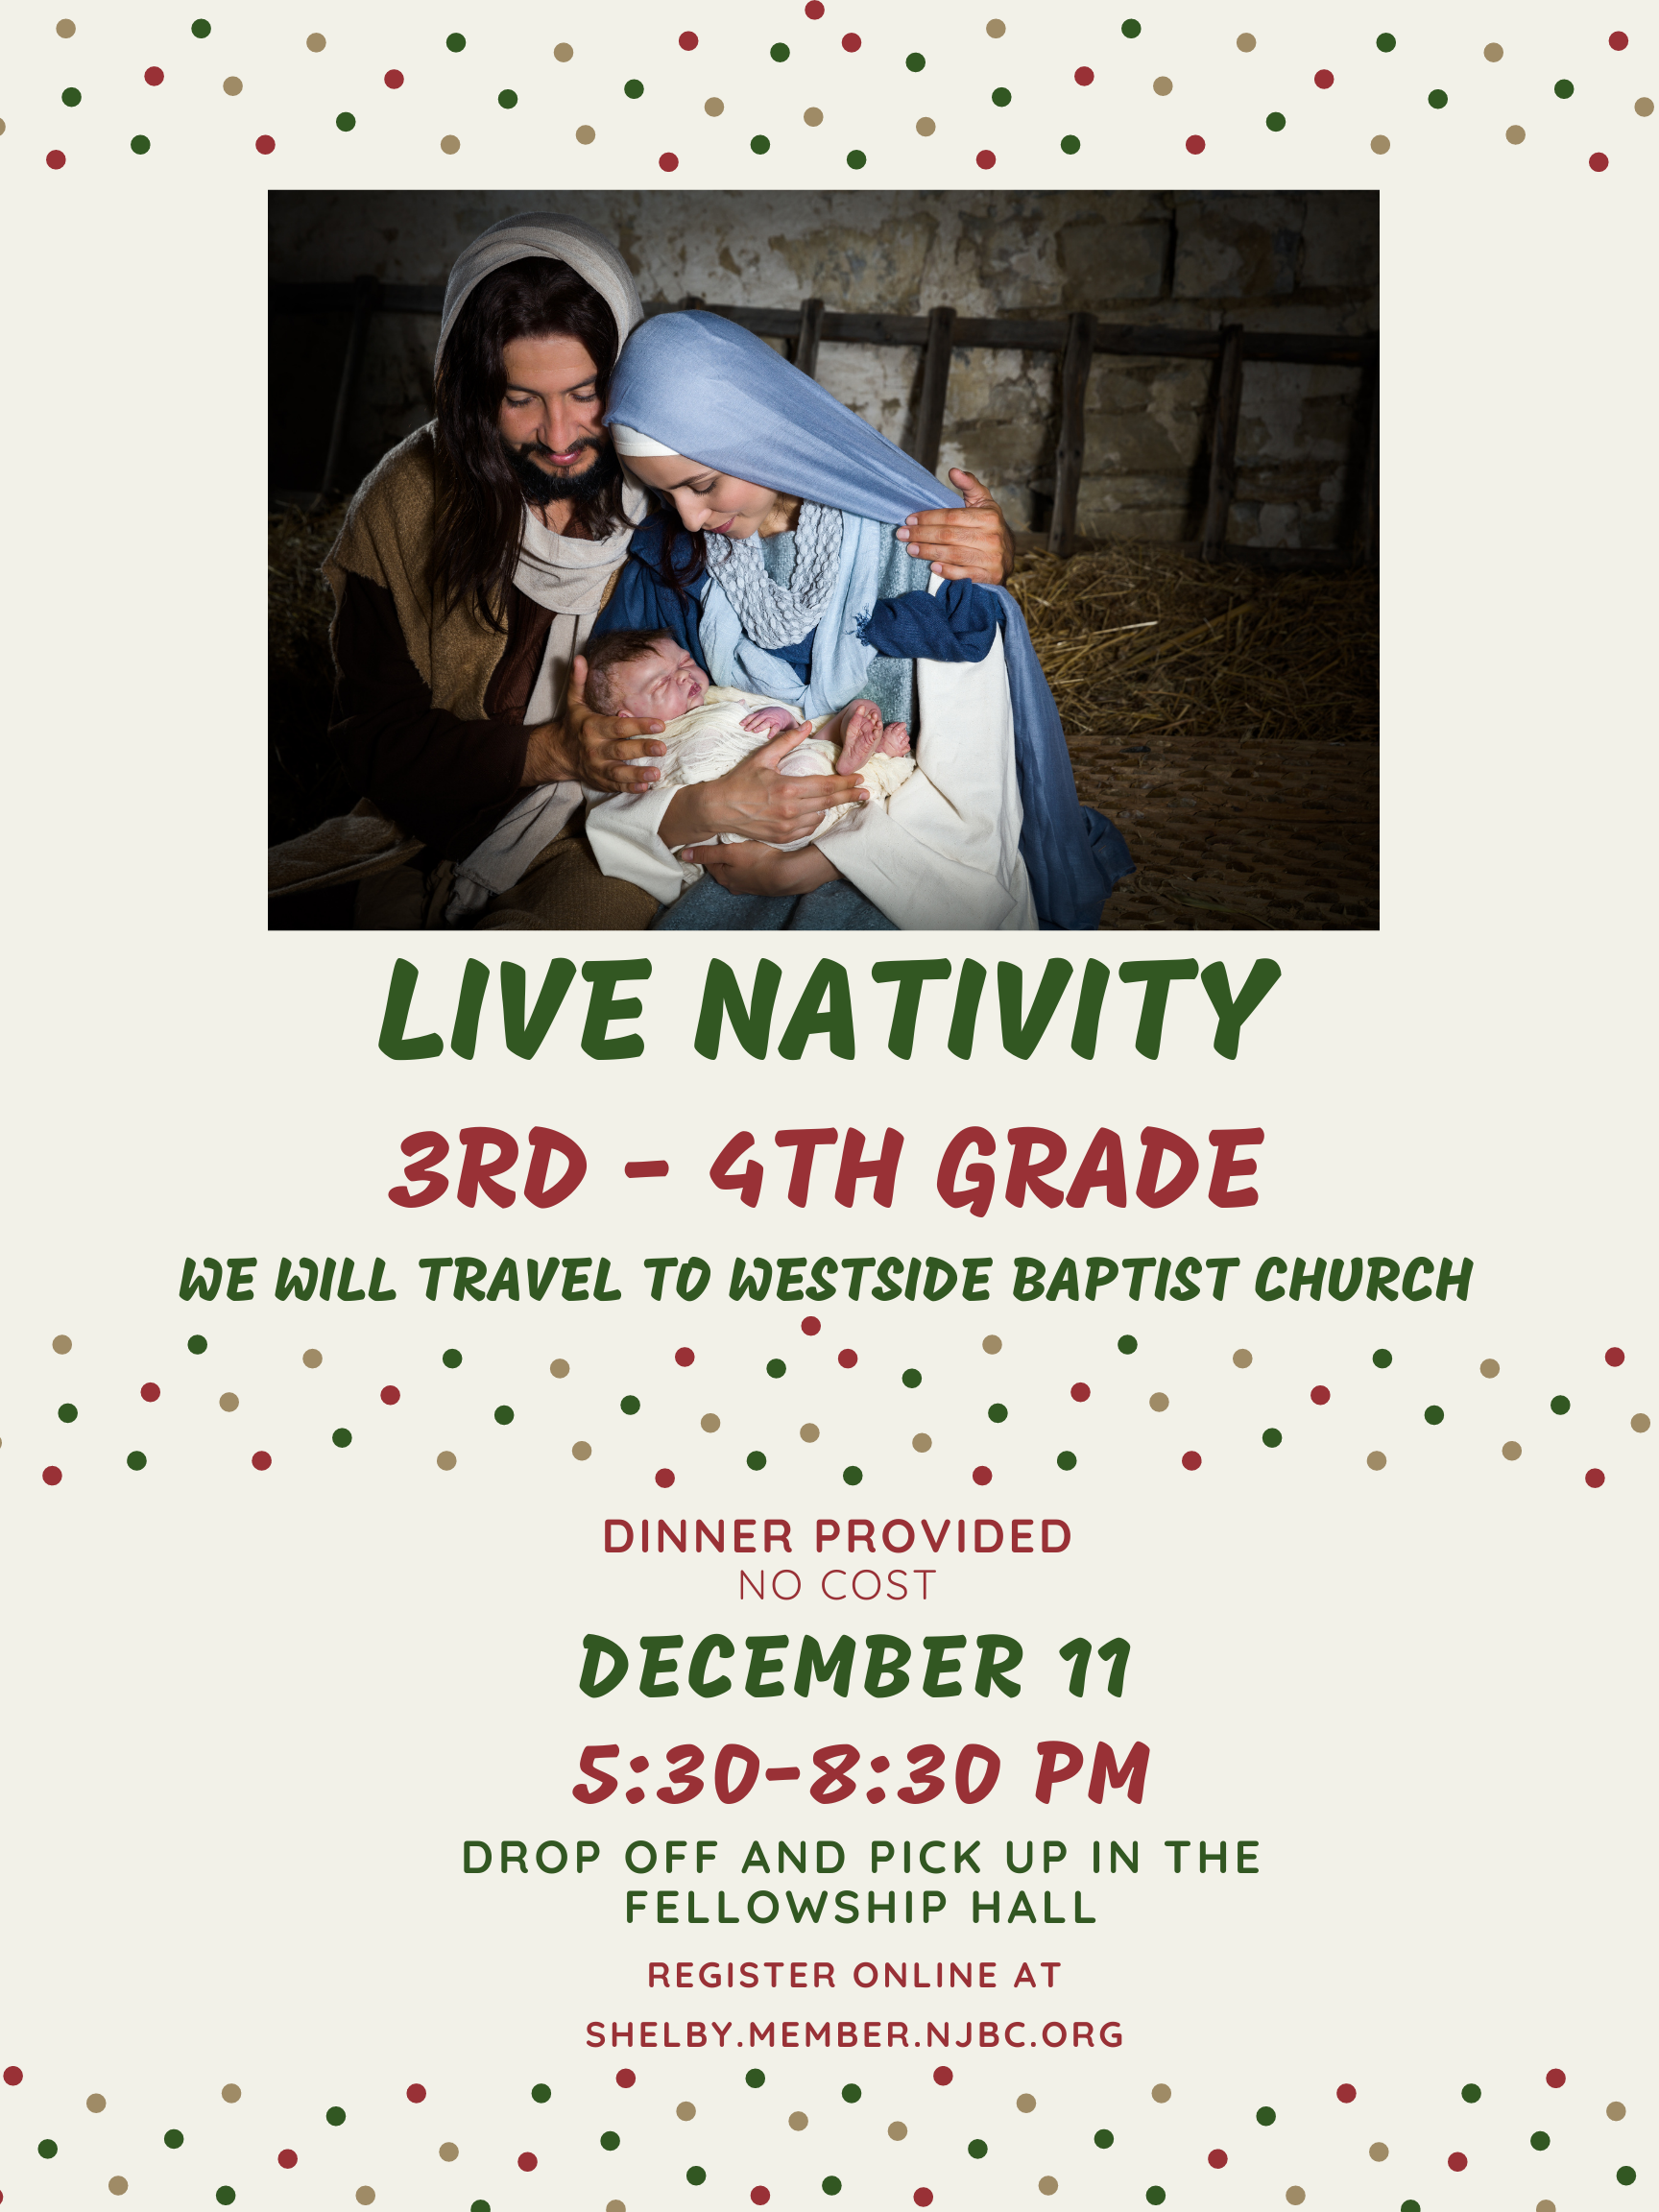 3rd and 4th Grade Live Nativity Event December 11